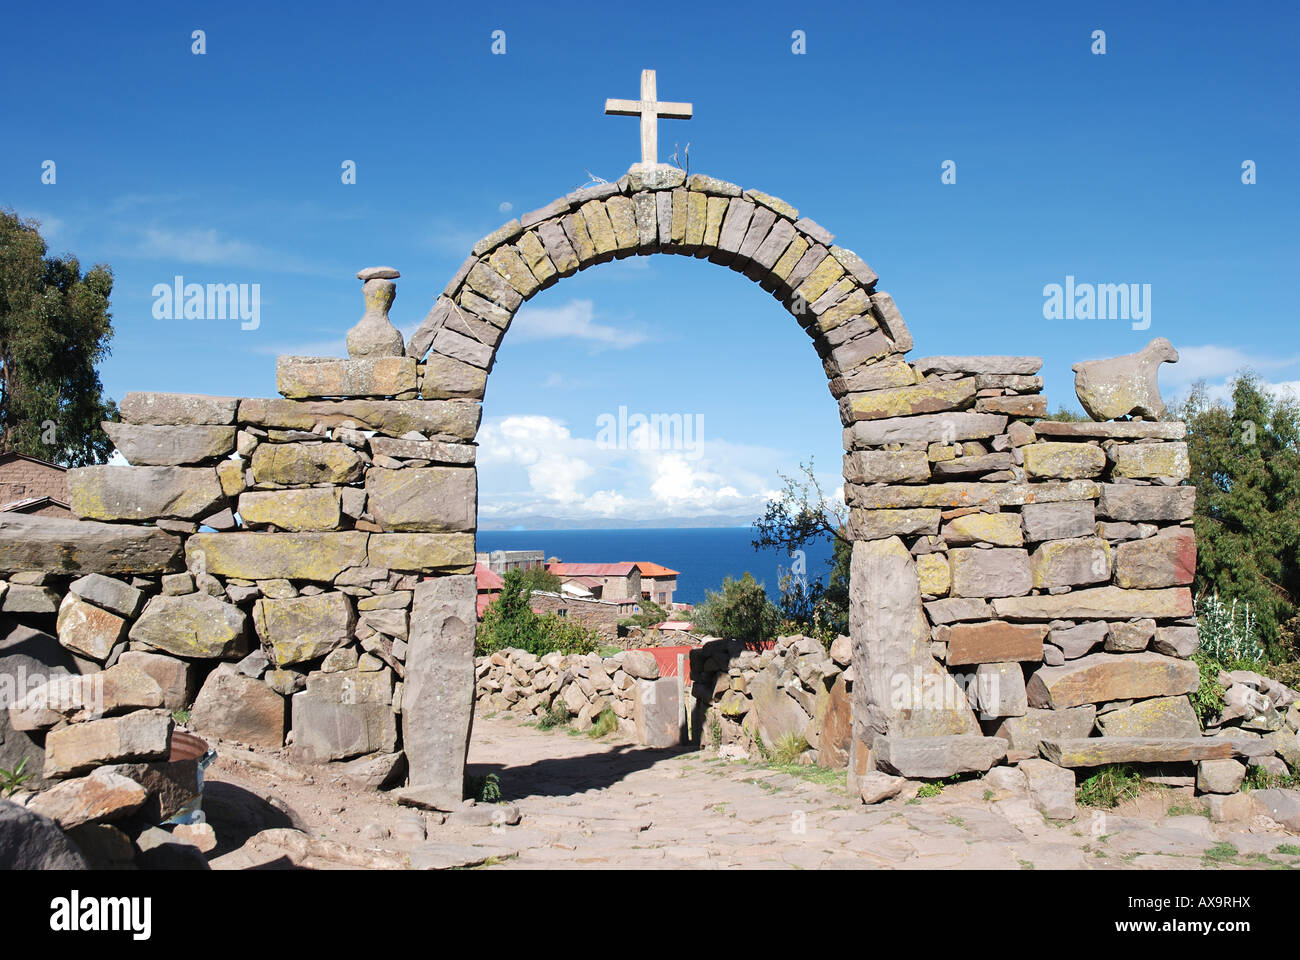 Stone arch with cross on the island of Taquile in Lake Titicaca off the coast of Puno, Peru Stock Photo